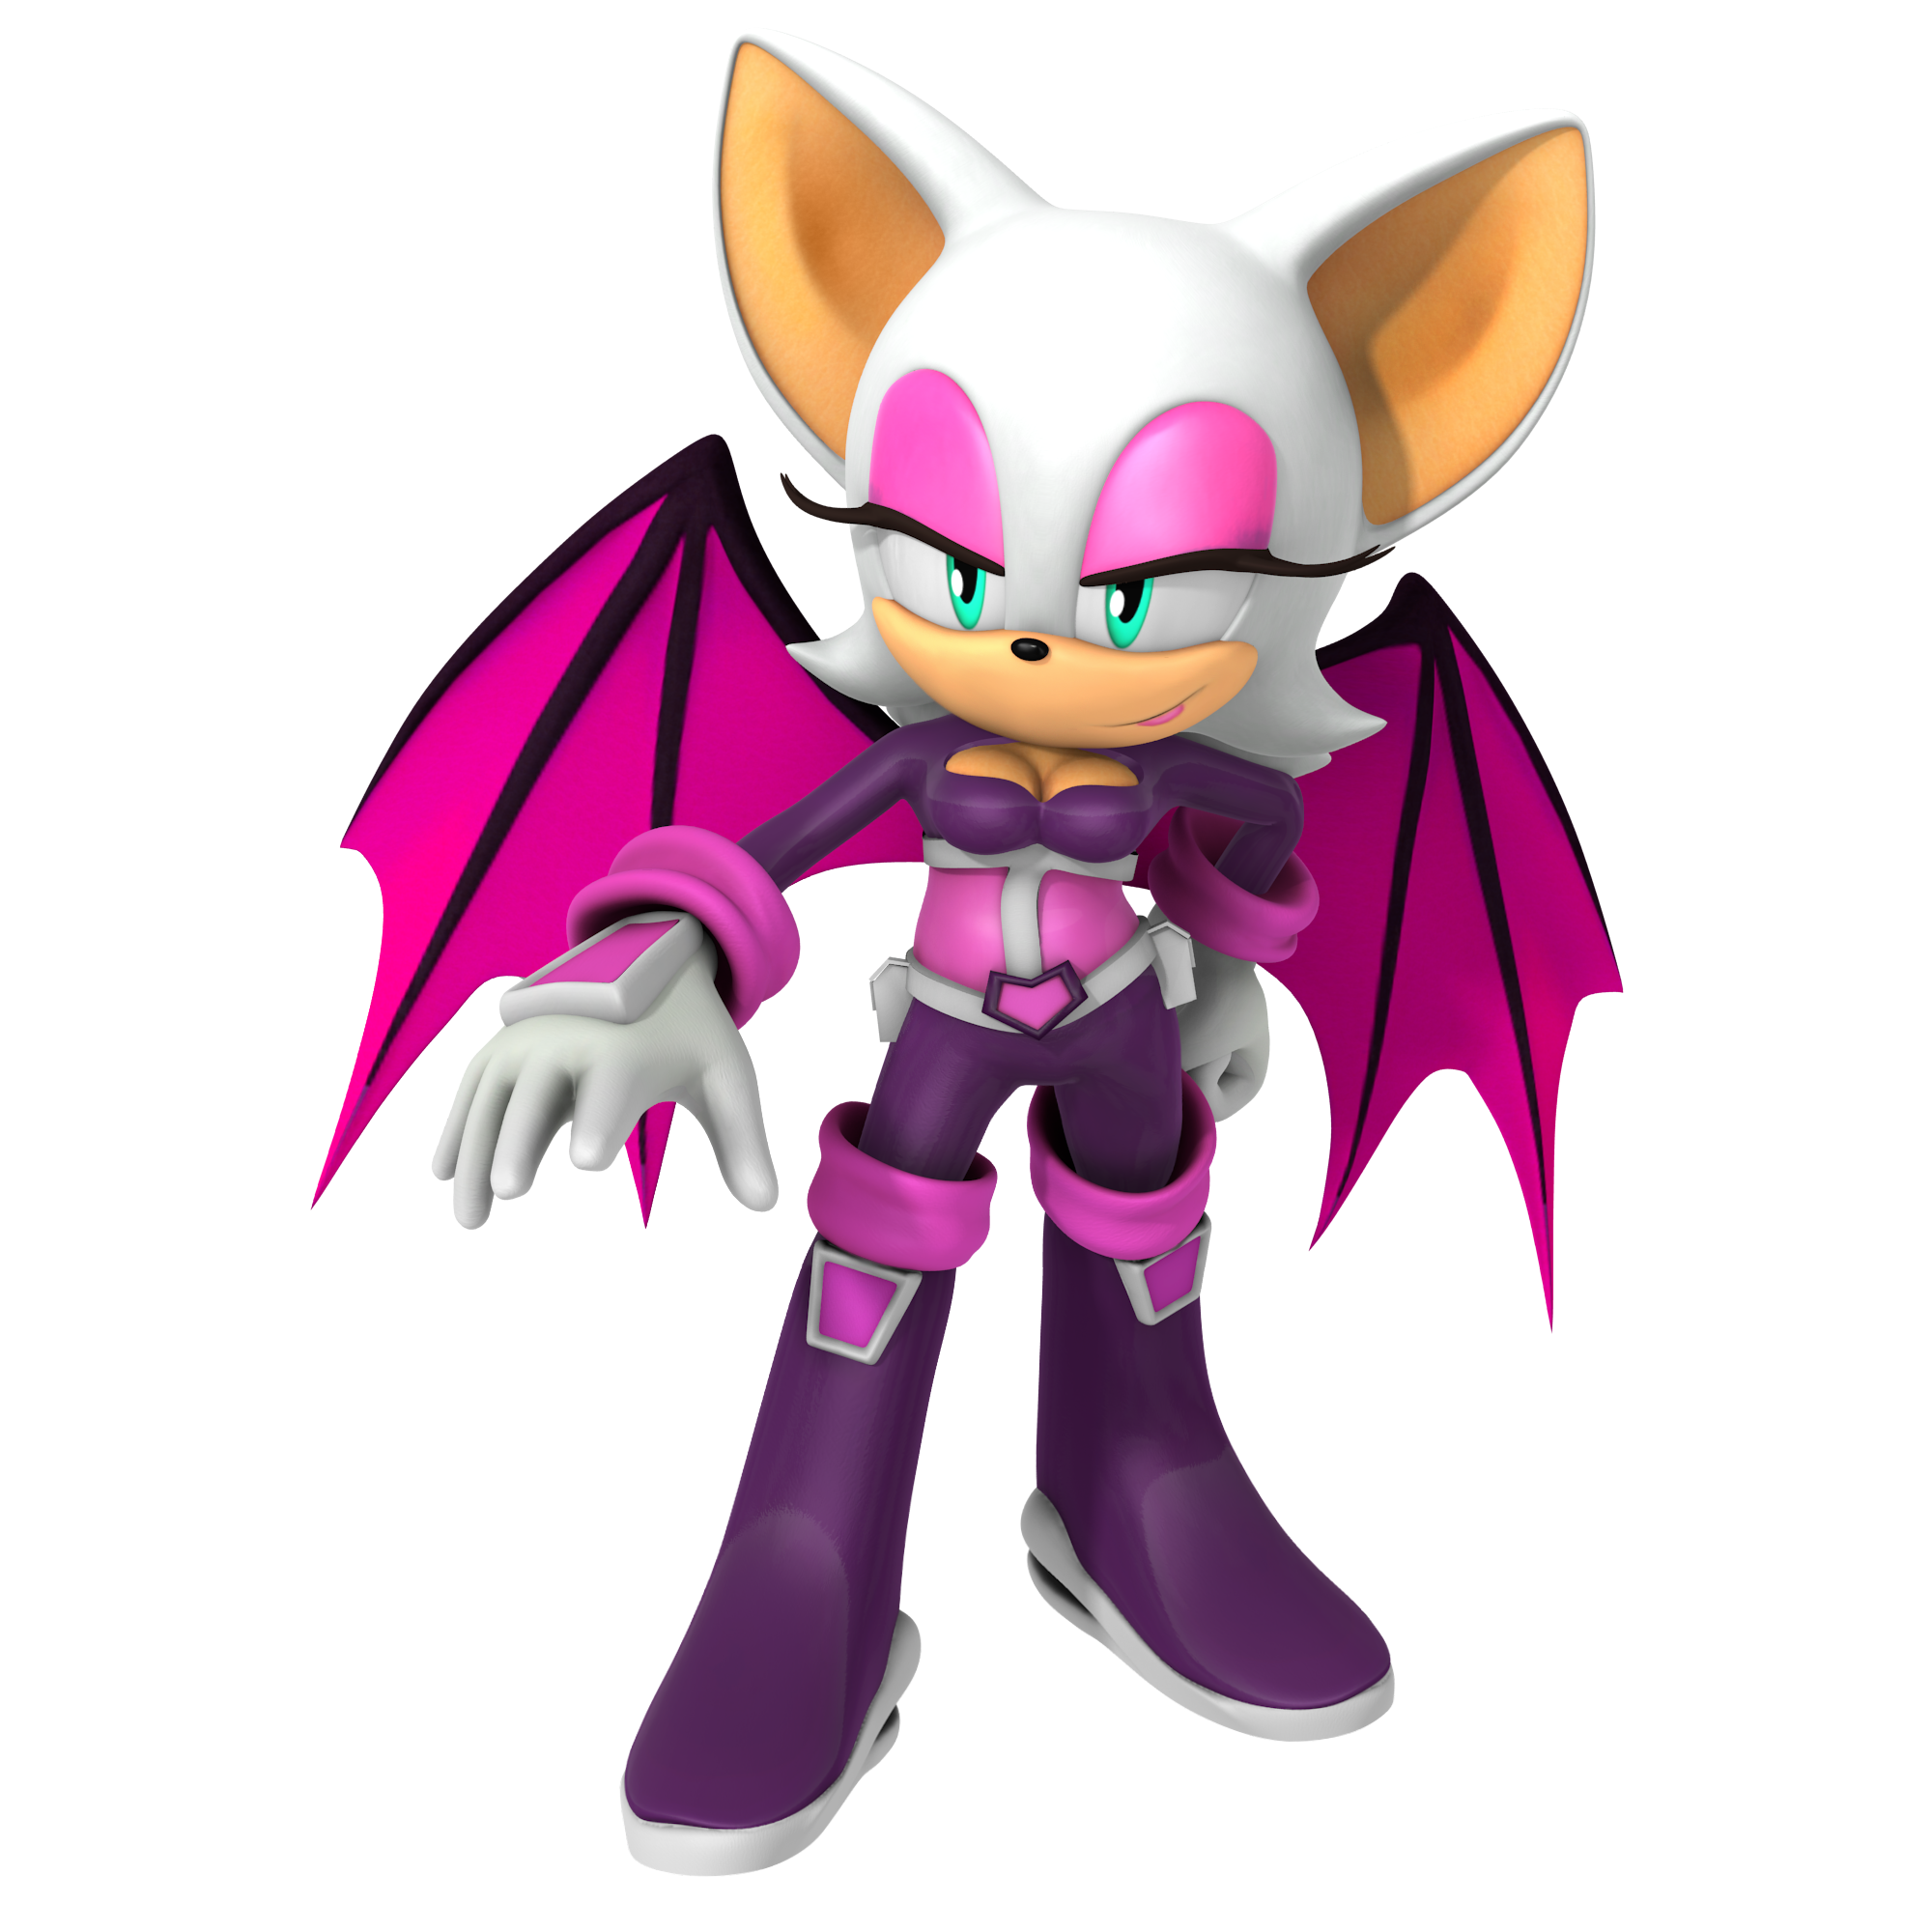 Rouge The Bat PNG Picture